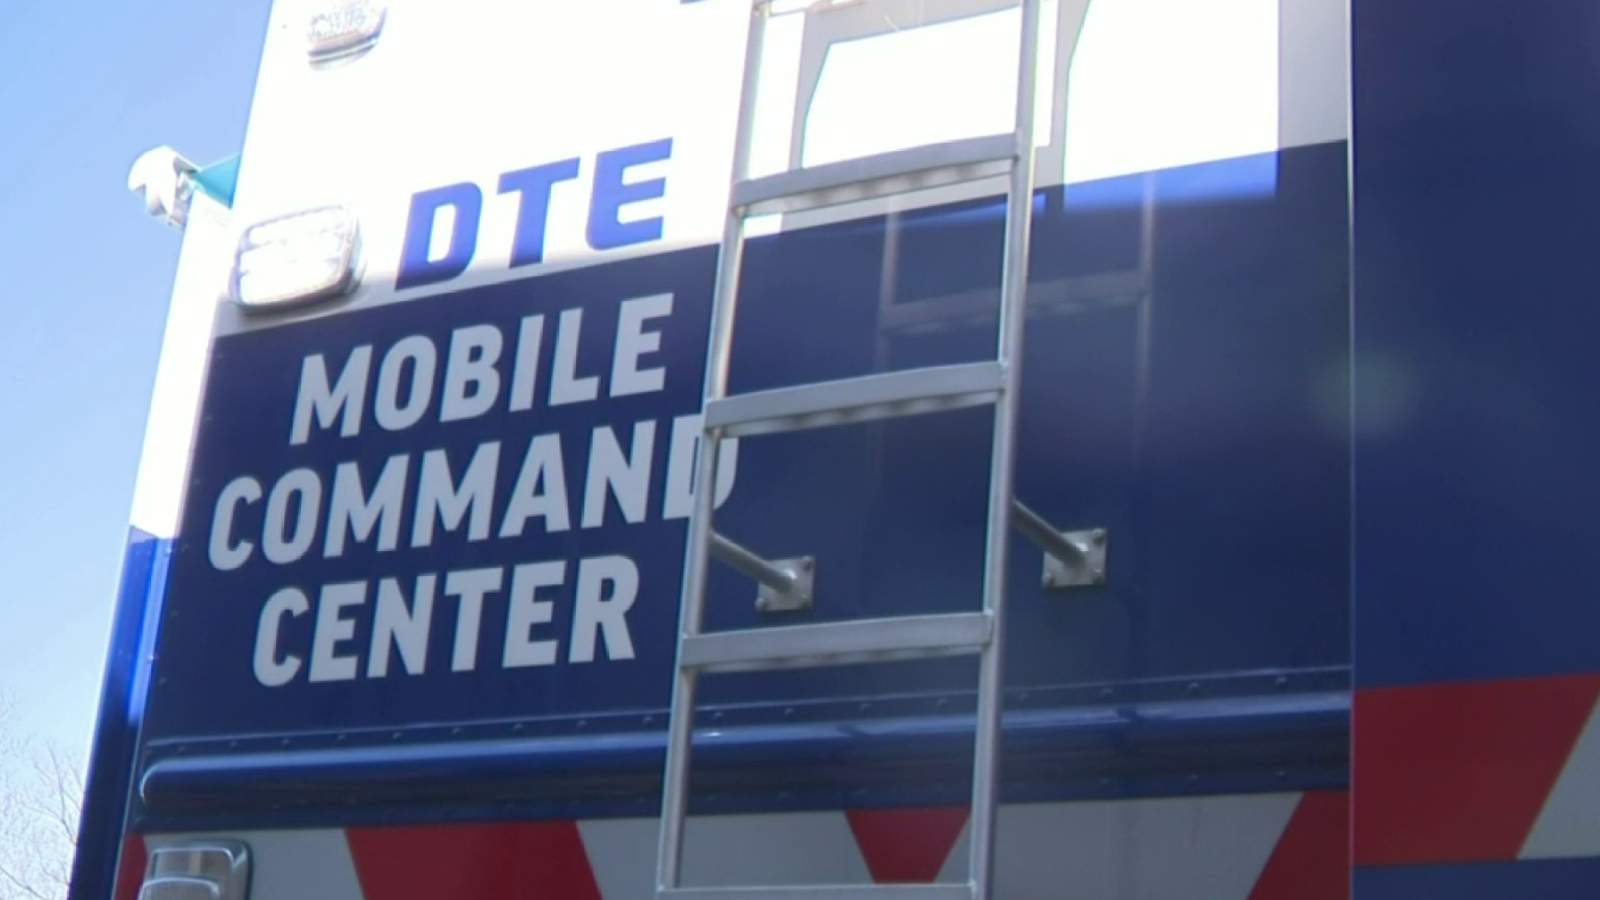 Tech Time: Introducing the DTE Mobile Command Center